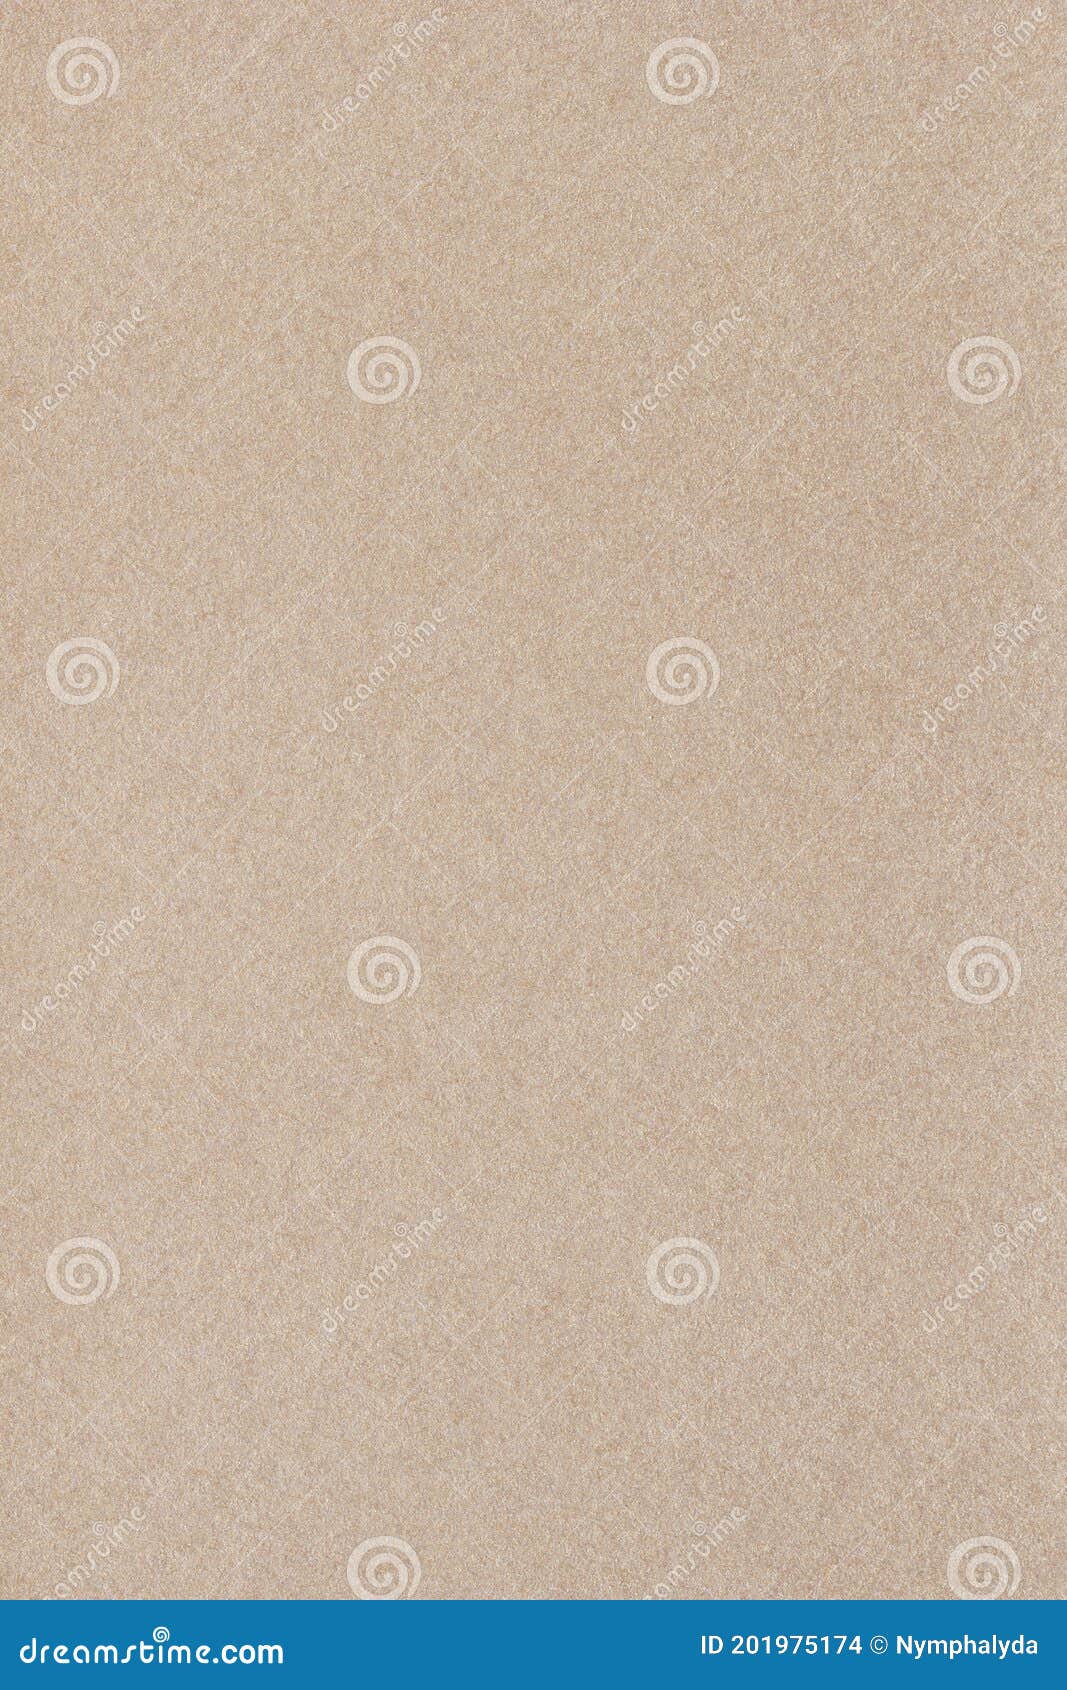 Textured Brown Vintage Paper Background for Design Stock Photo - Image ...